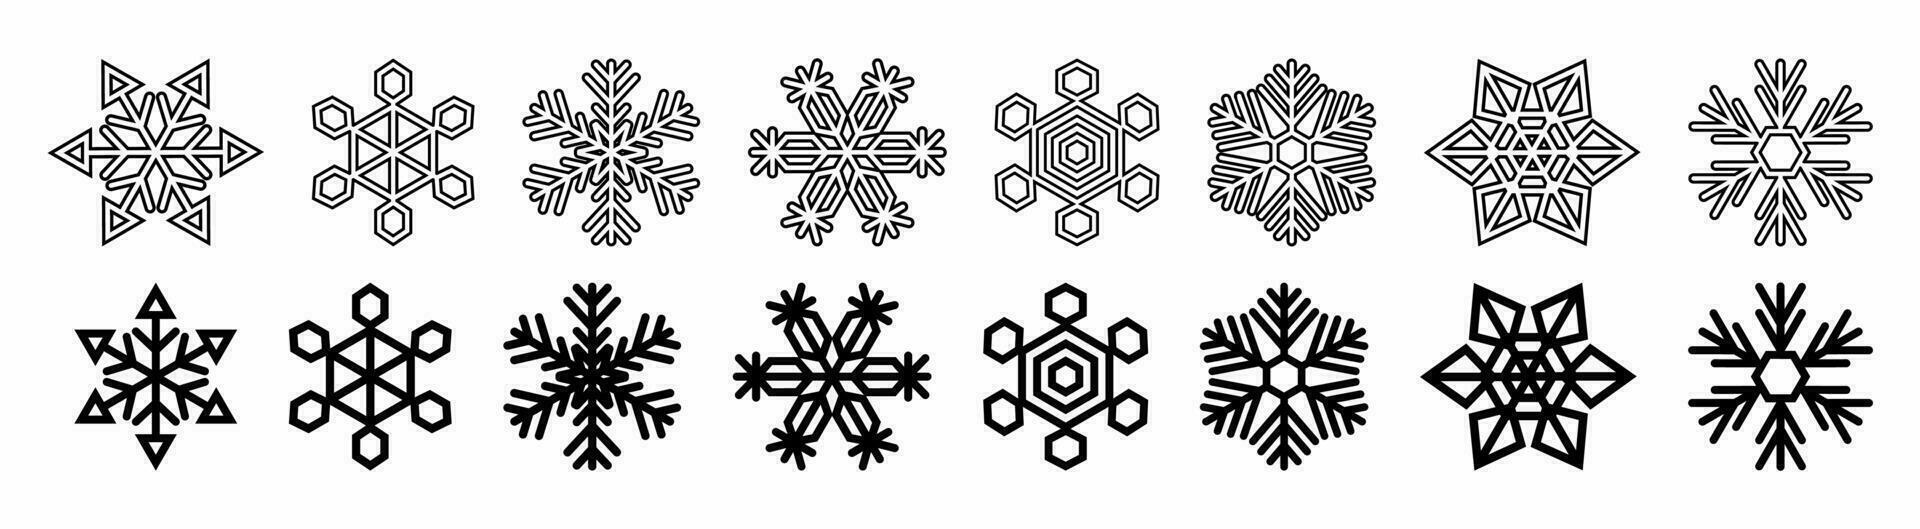 Snowflakes set vector isolated on white background. Outline and solid line snowflakes icon. Winter Frozen Geometric Symbol.